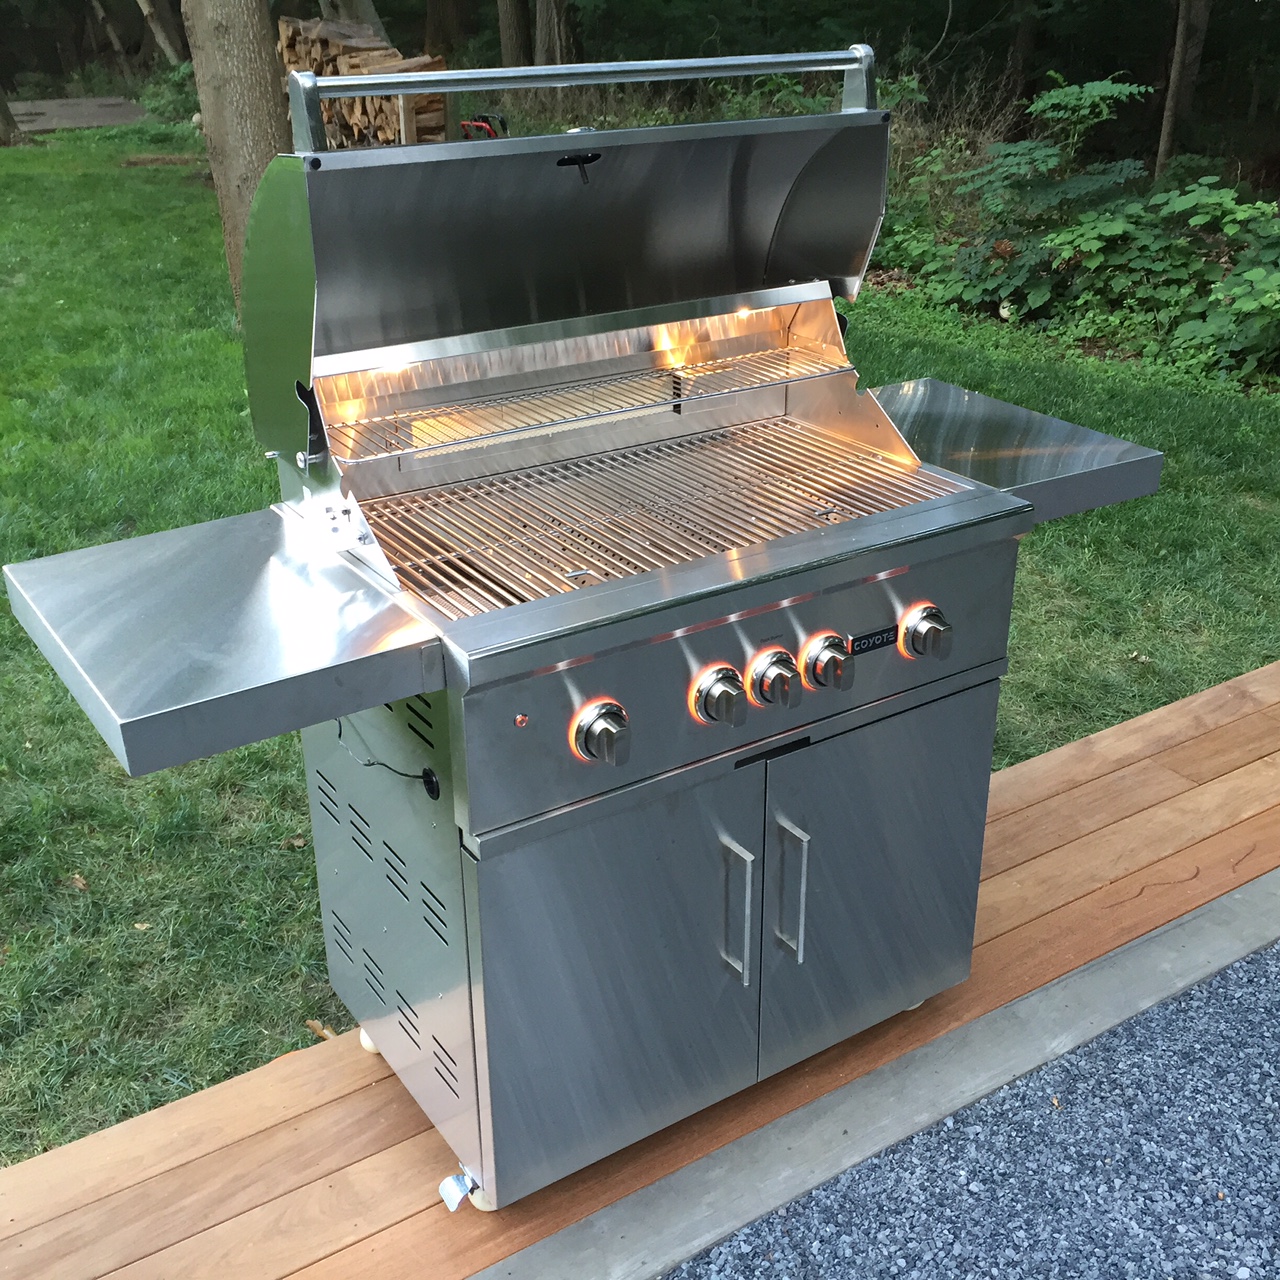 Unboxing Coyote Grill for Outdoor Kitchen | Jon Peters Art & Home